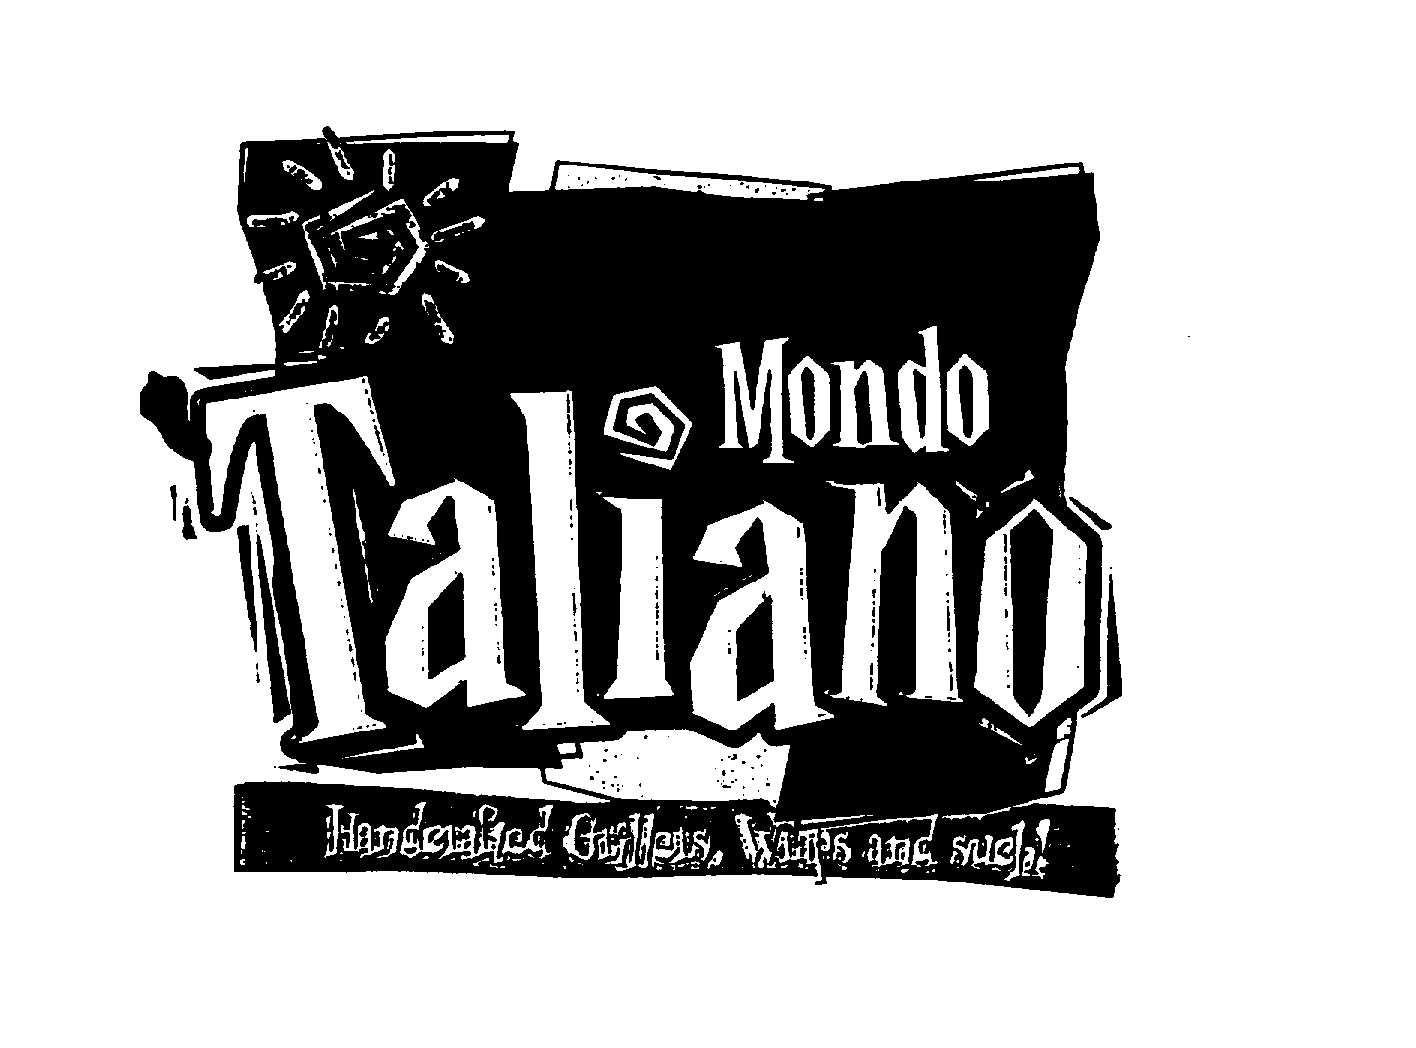  MONDO TALIANO HANDCRAFTED GRILLERS, WRAPS